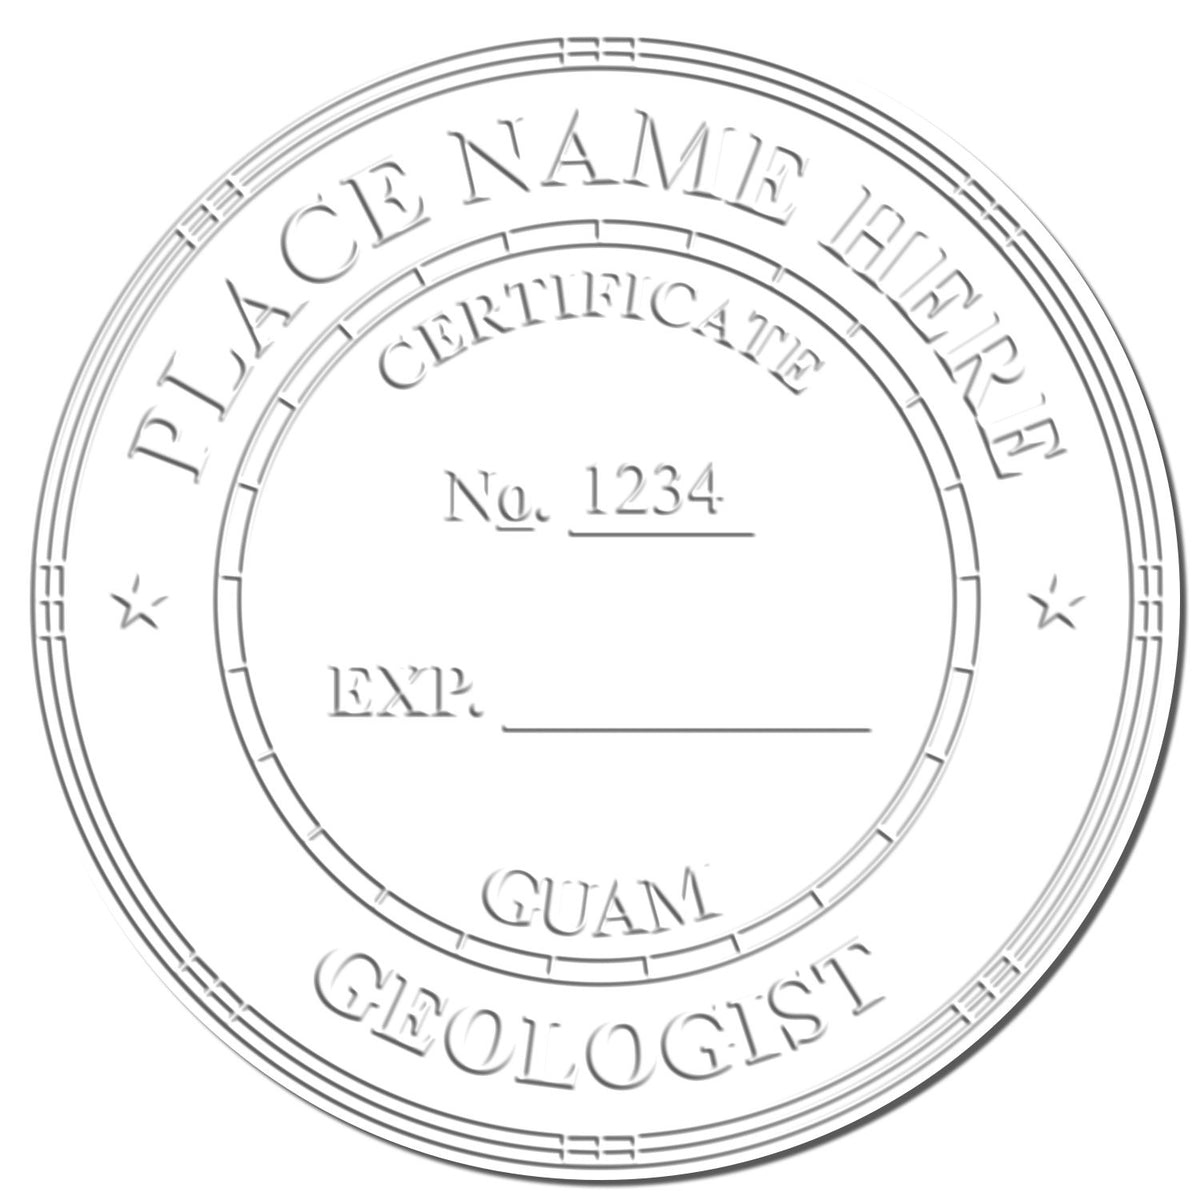 The Guam Geologist Desk Seal stamp impression comes to life with a crisp, detailed image stamped on paper - showcasing true professional quality.